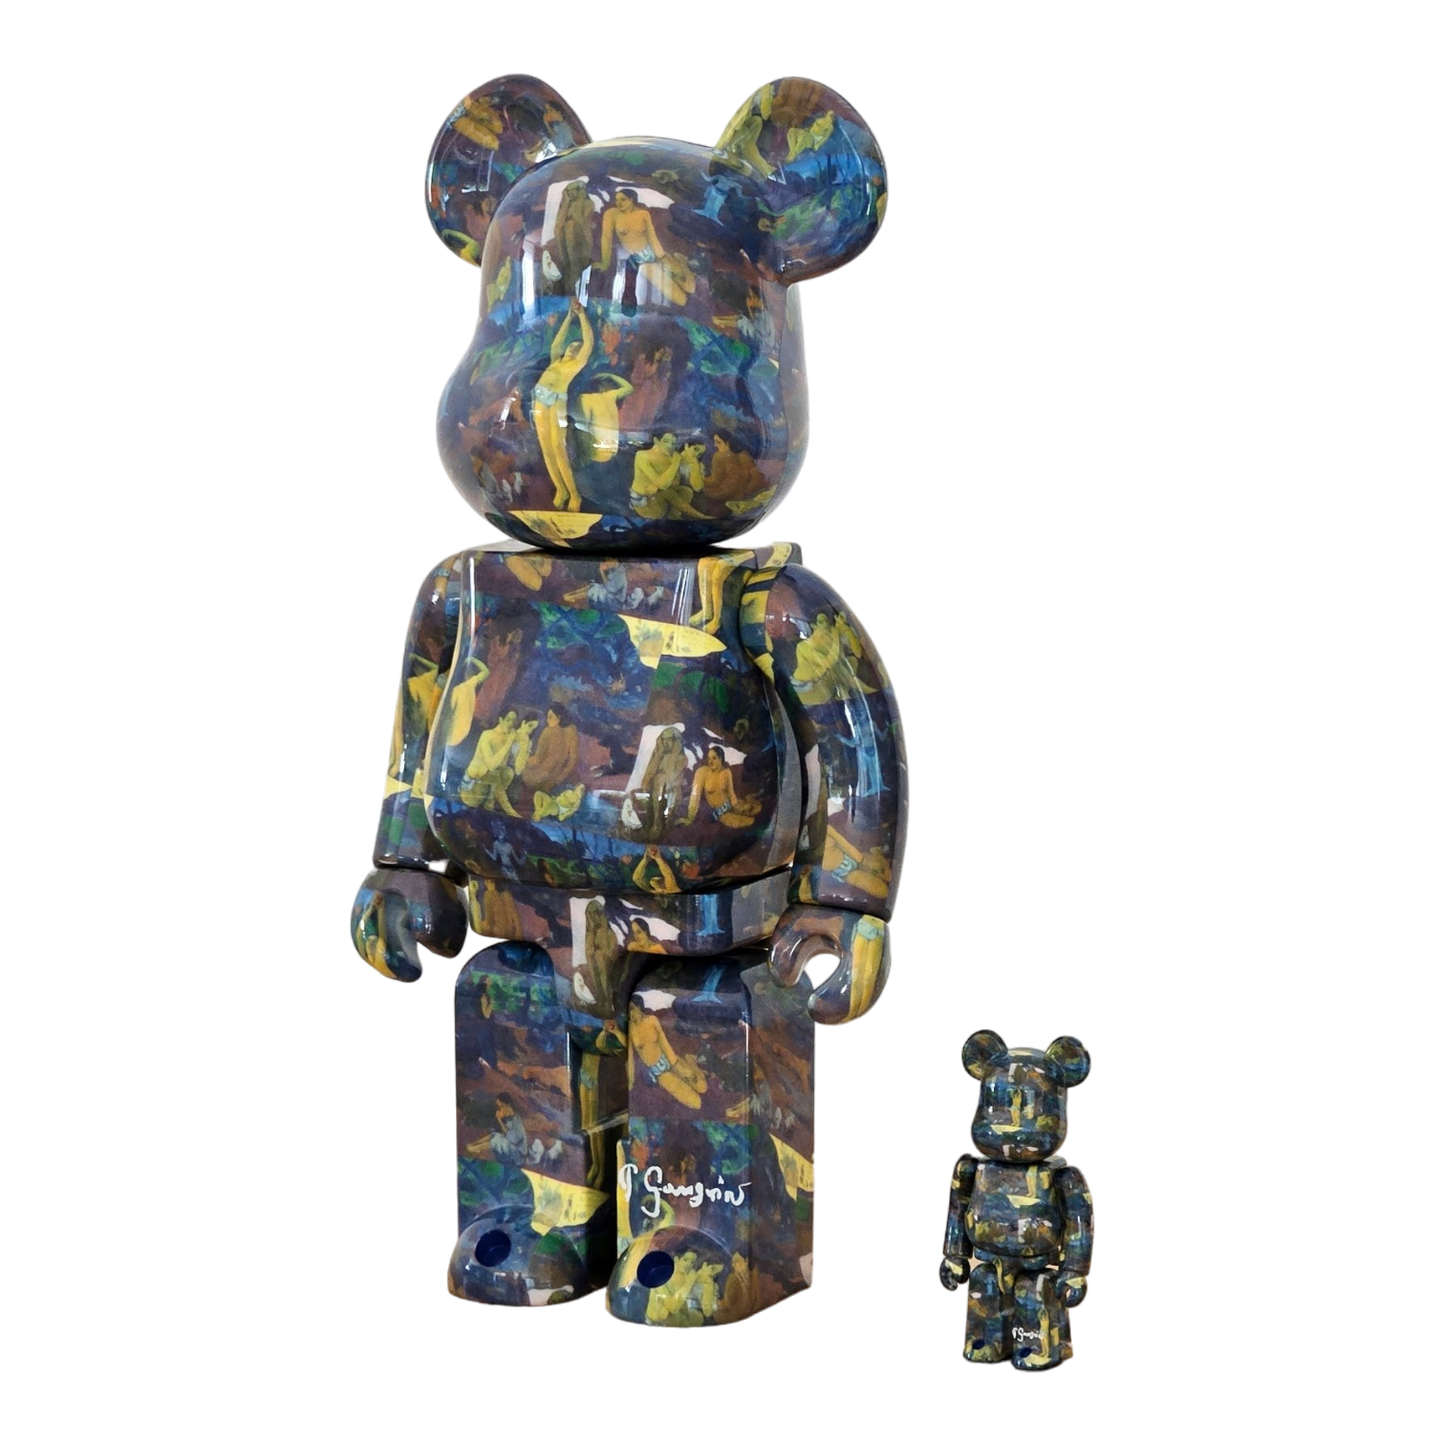 BE@RBRICK Eugène Henri Paul Gauguin "Where Do We Come From? What Are We? Where Are We Going?" (100%+400%)